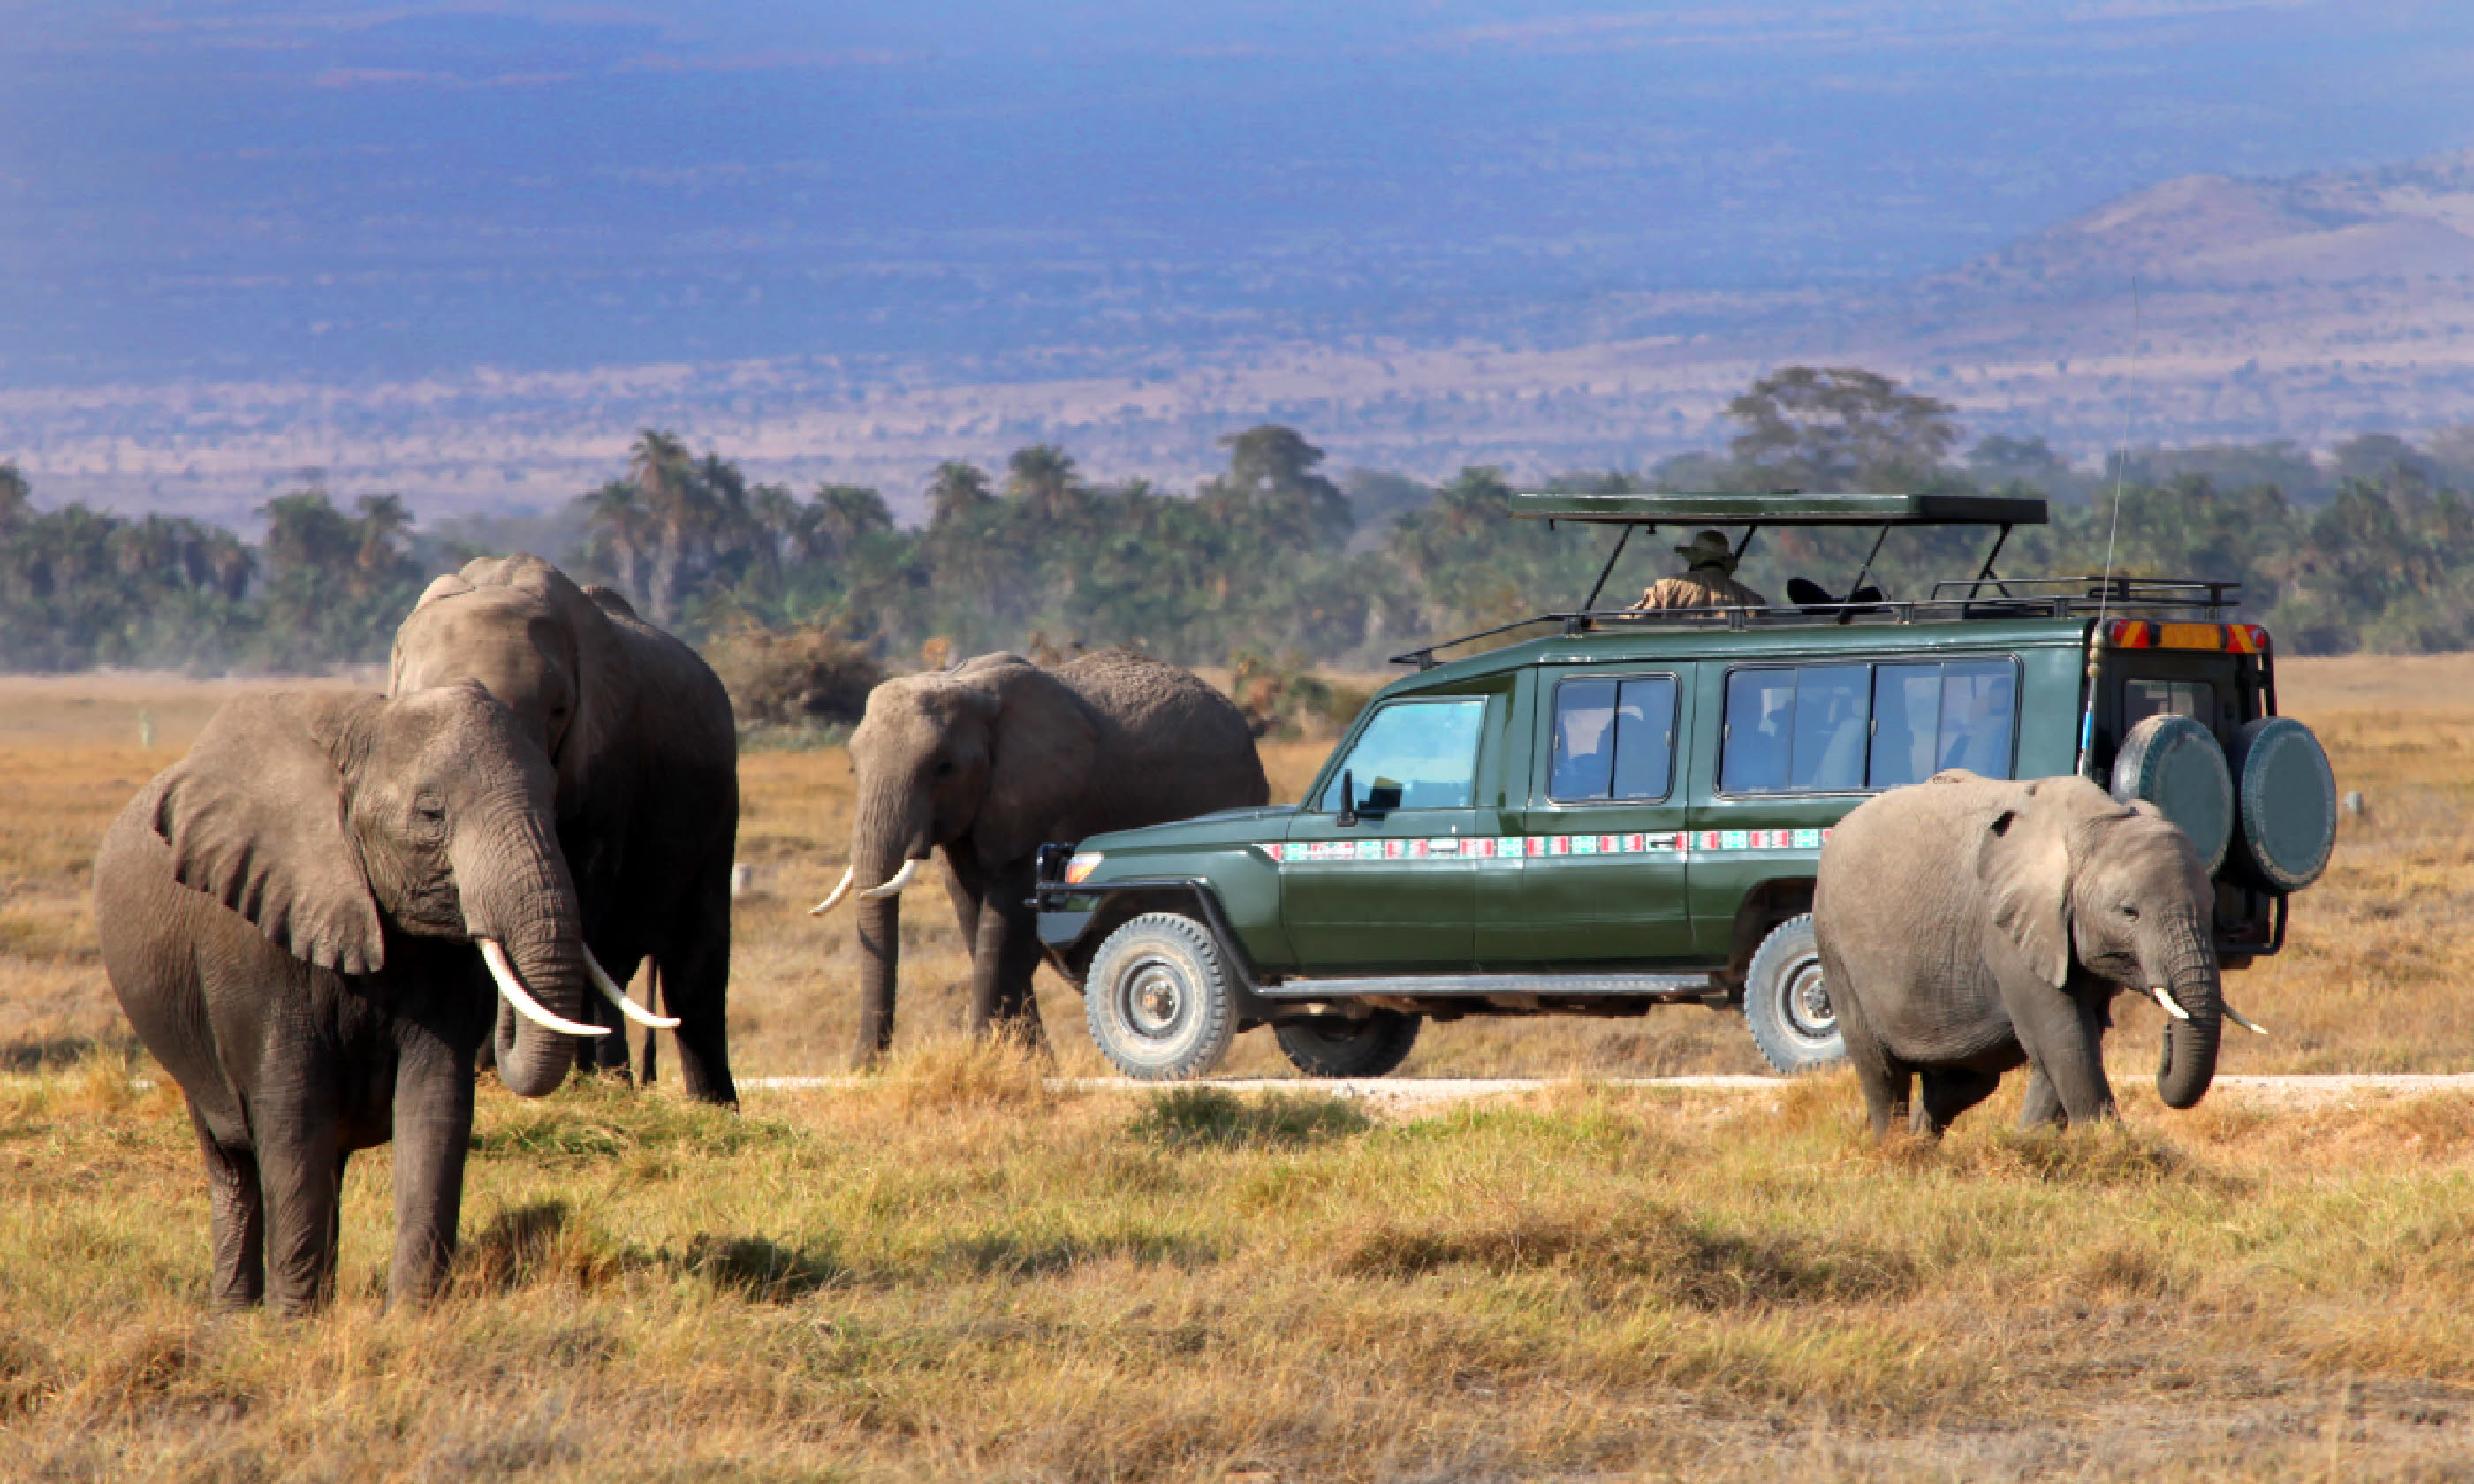 Safari game drive with elephants (Shutterstock: see credit below)